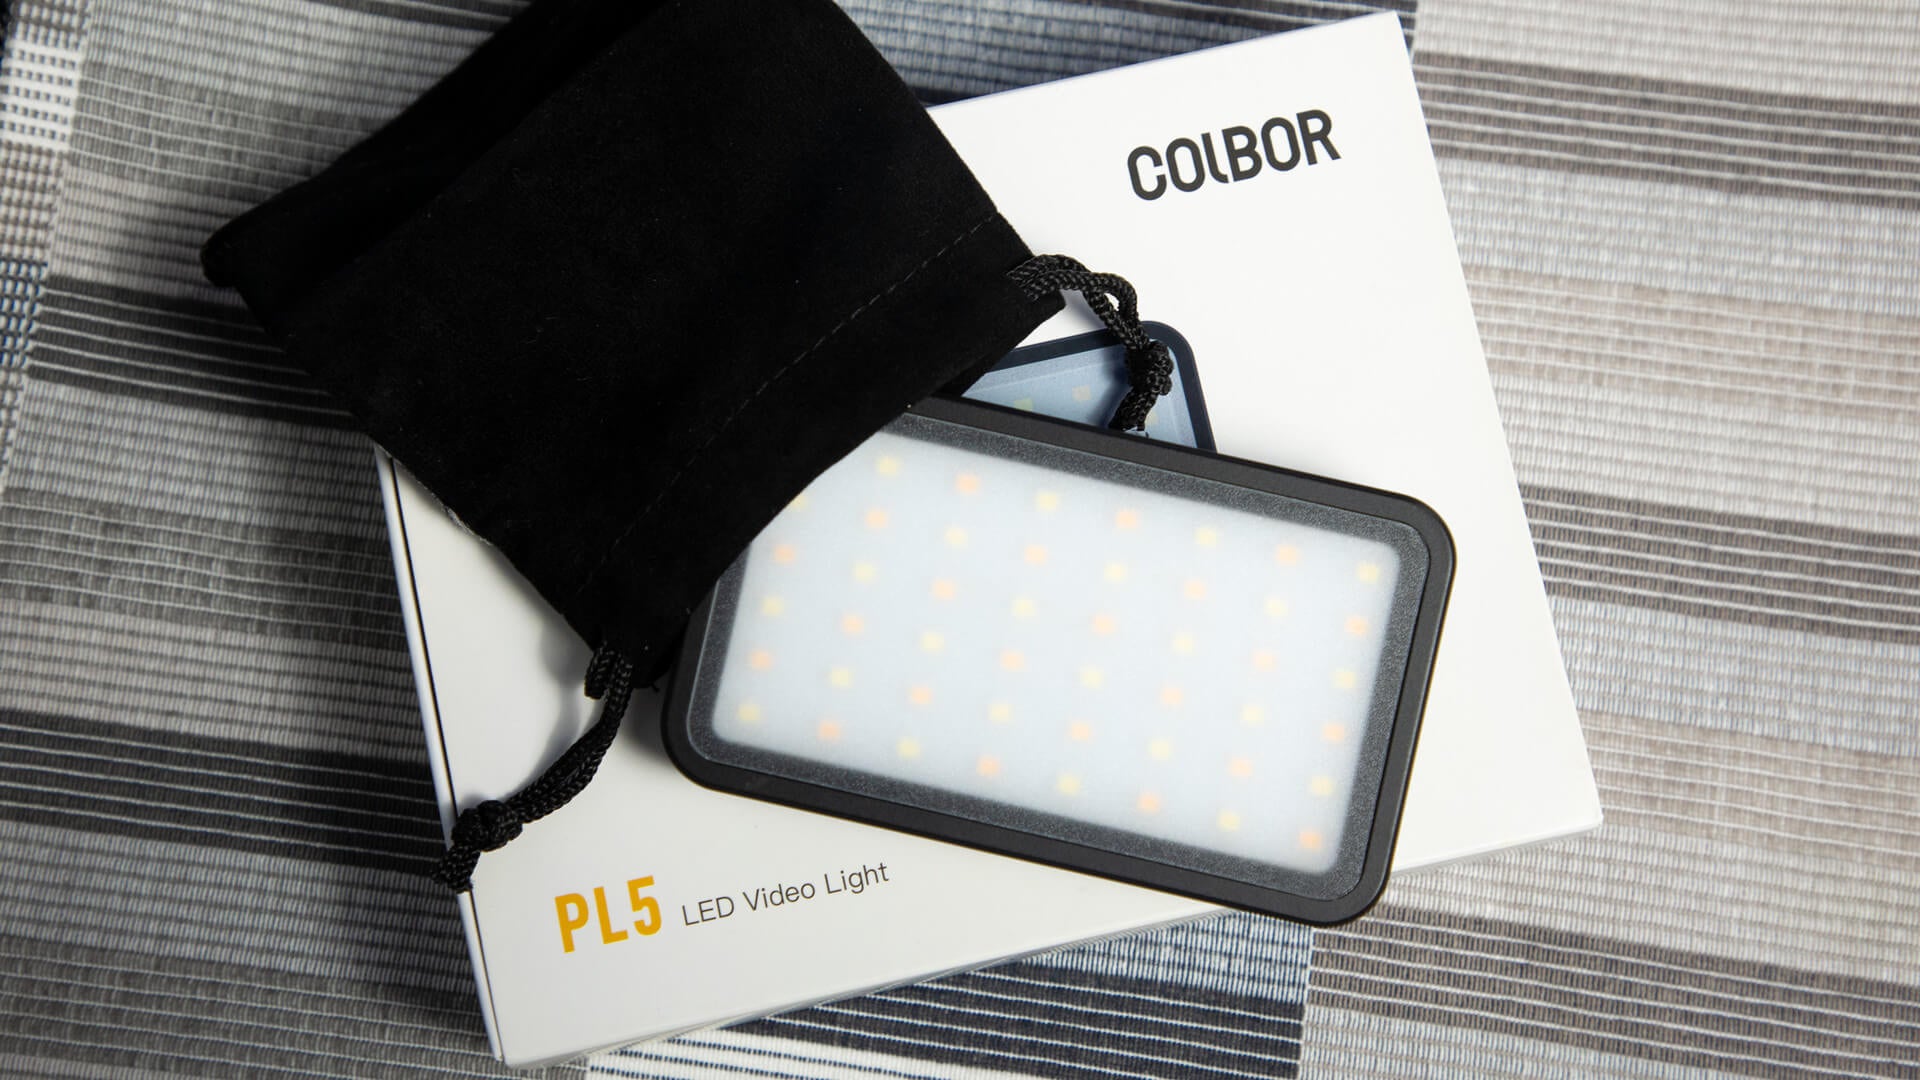 Product review: What is COLBOR PL5 YouTube camera light?